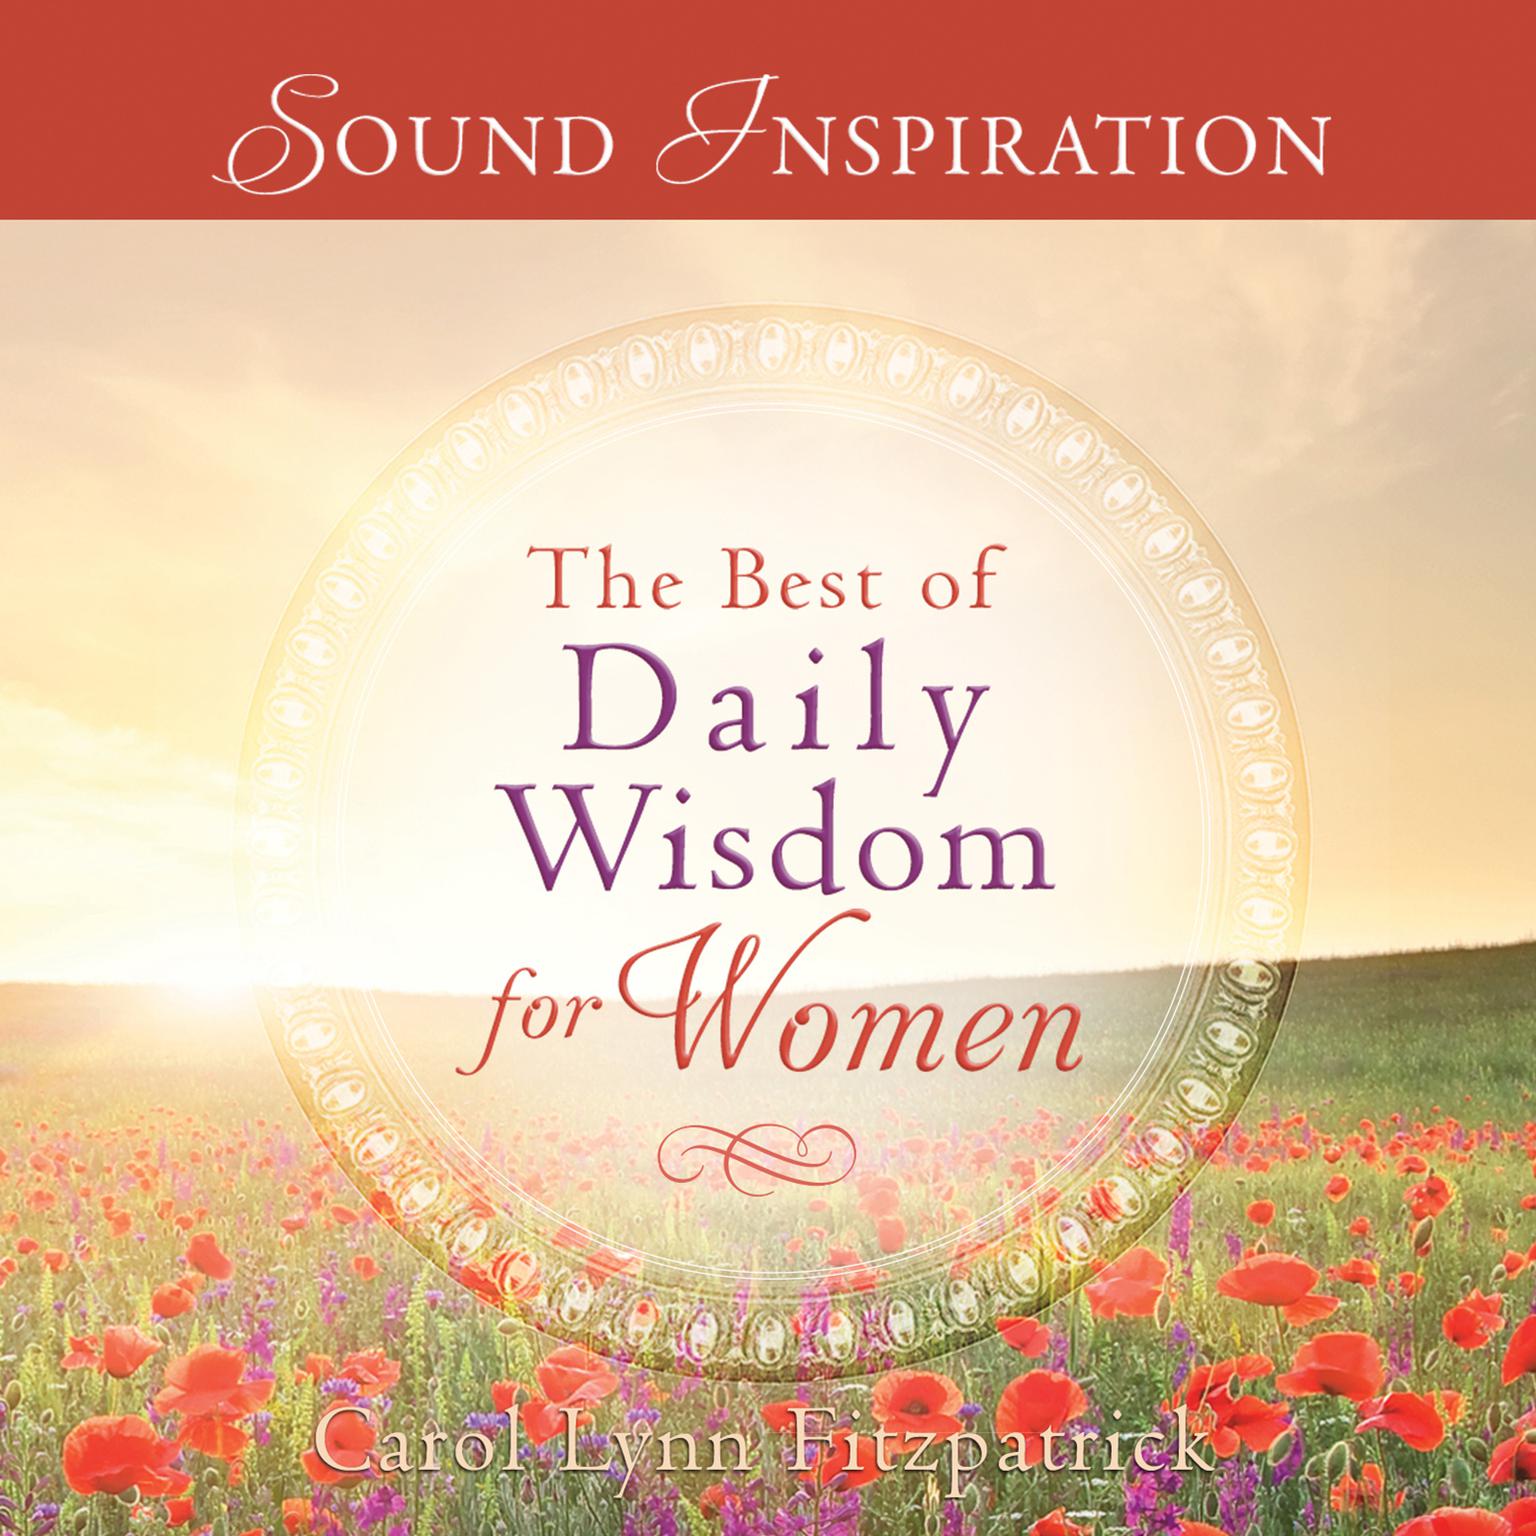 The Best of Daily Wisdom for Women Audiobook, by Carol lynn Fitzpatrick